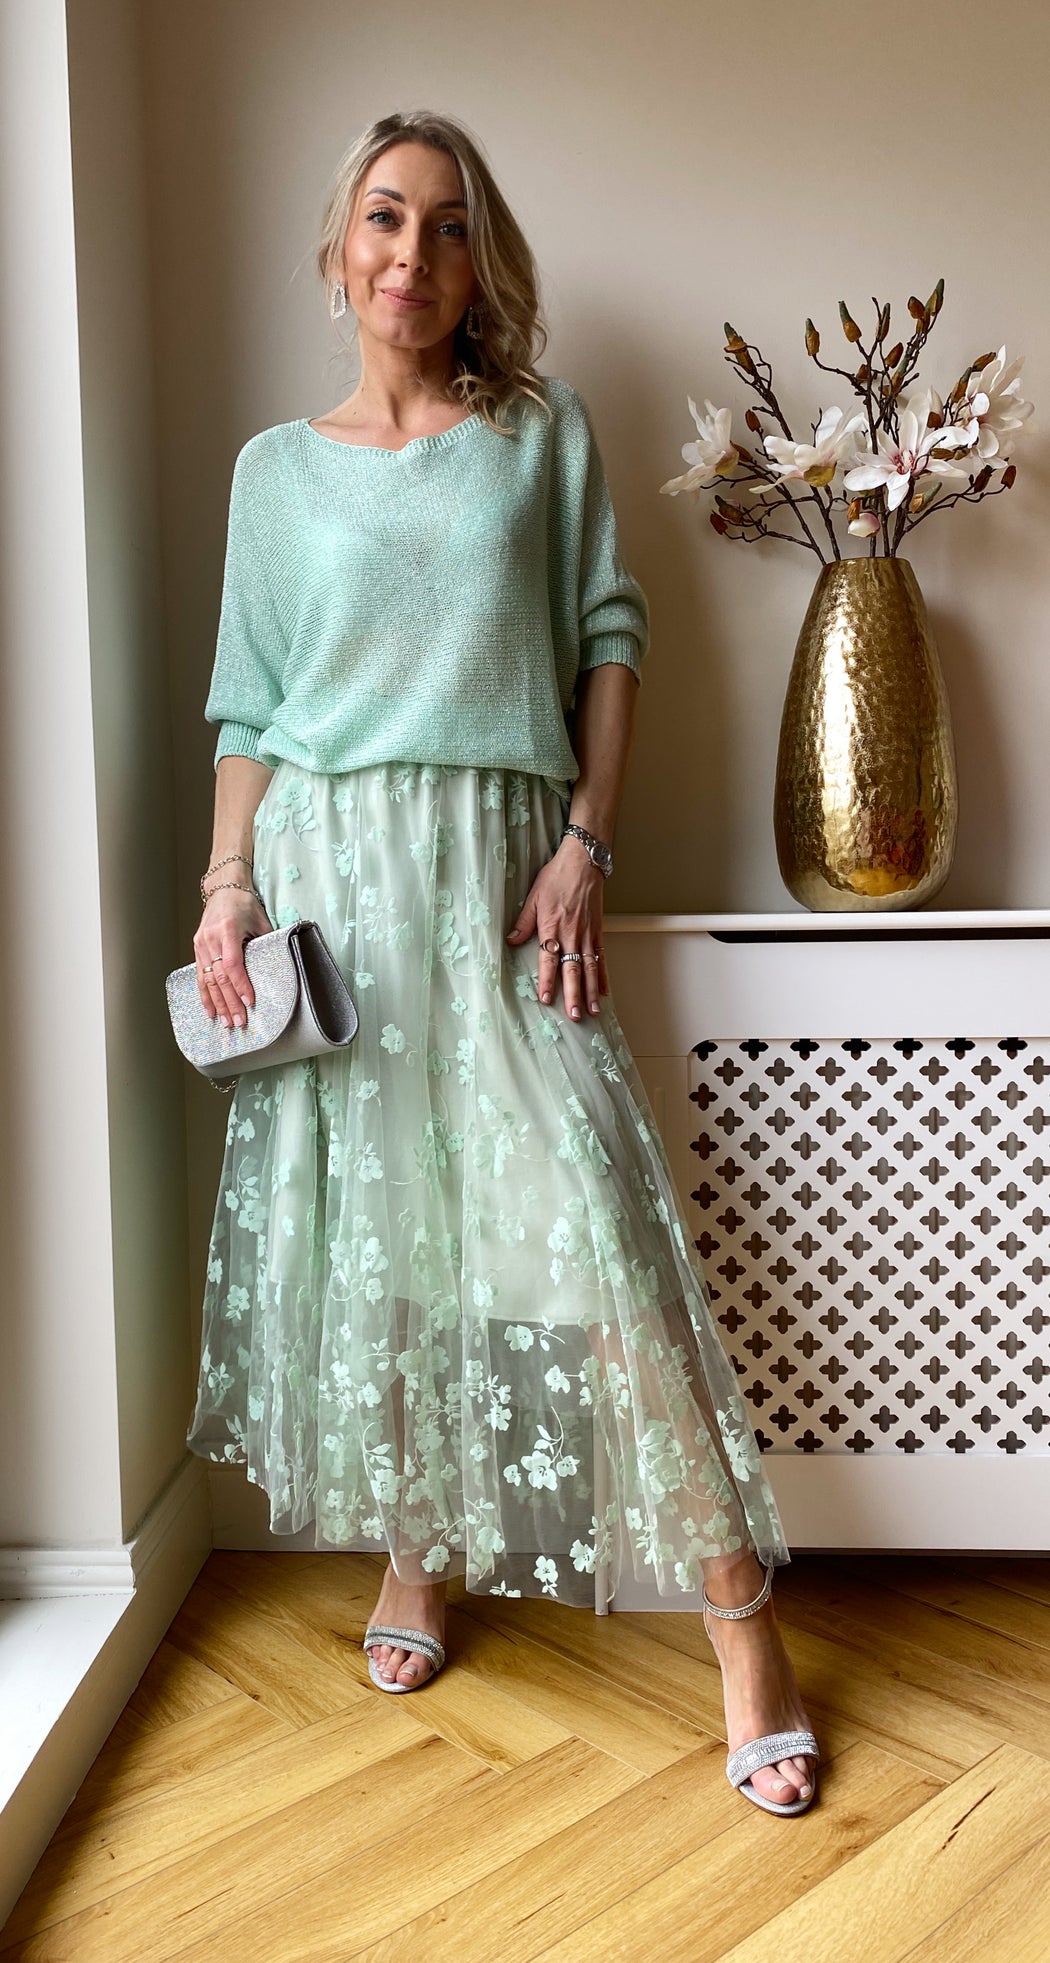 Lucey Mint green floral tulle skirt